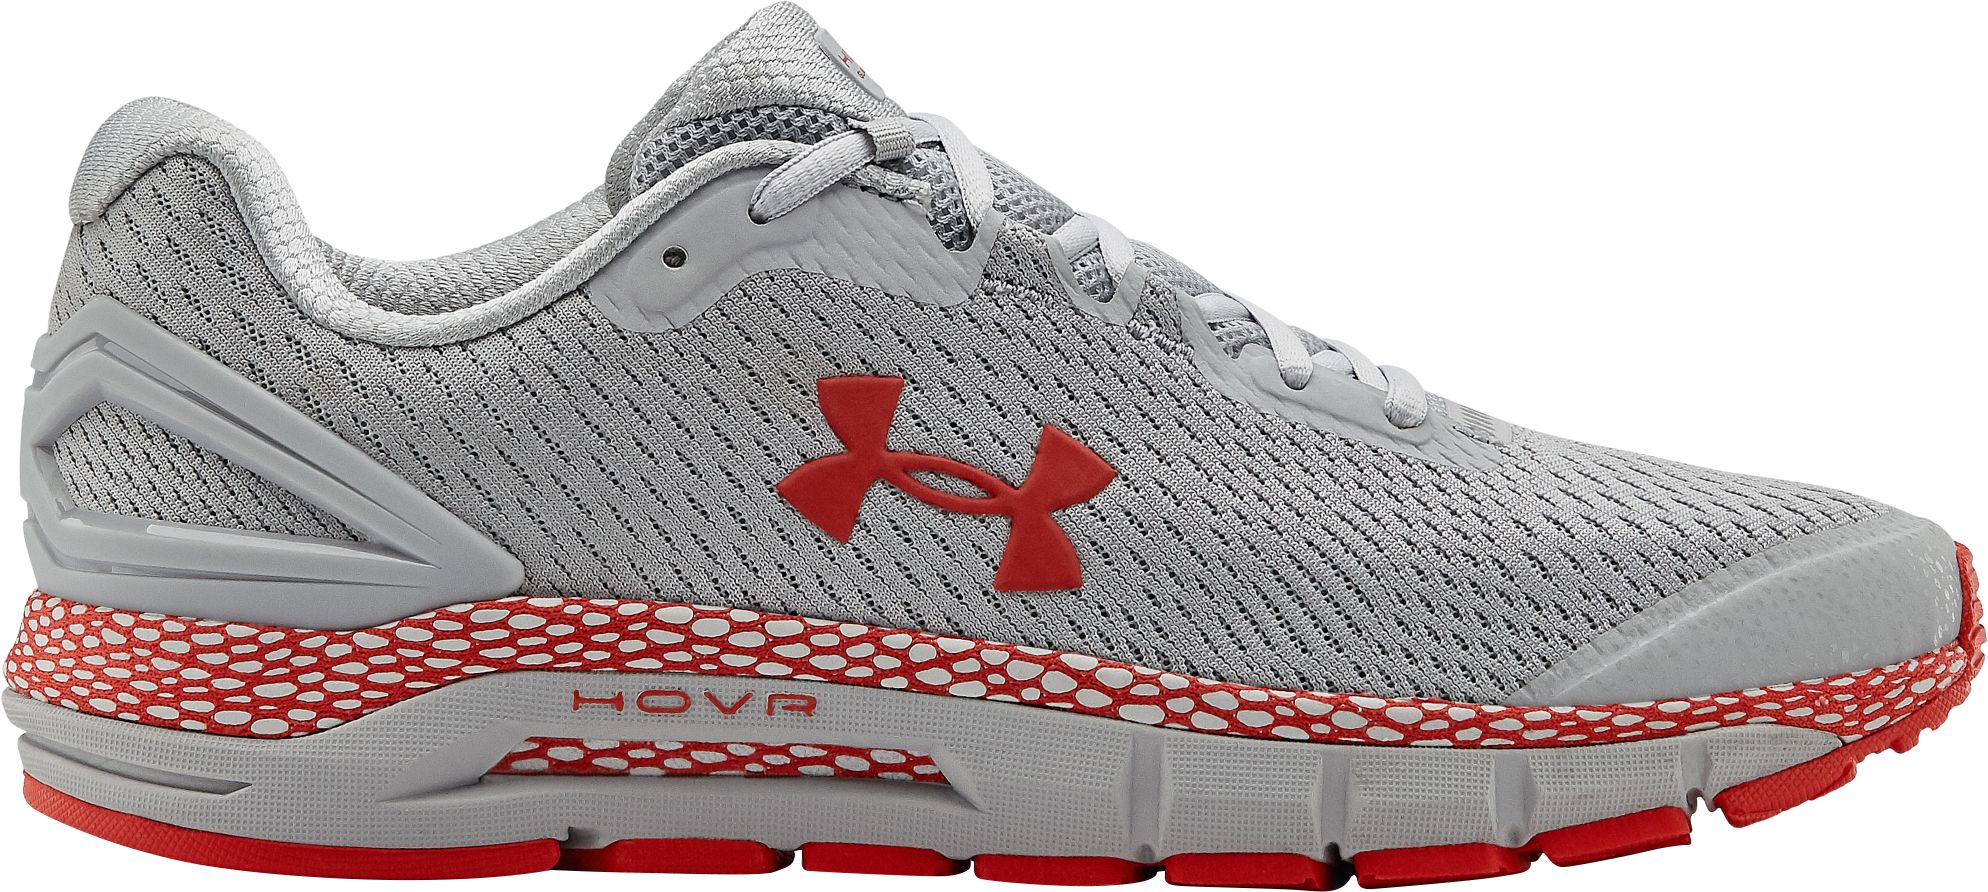 grey and red under armour shoes